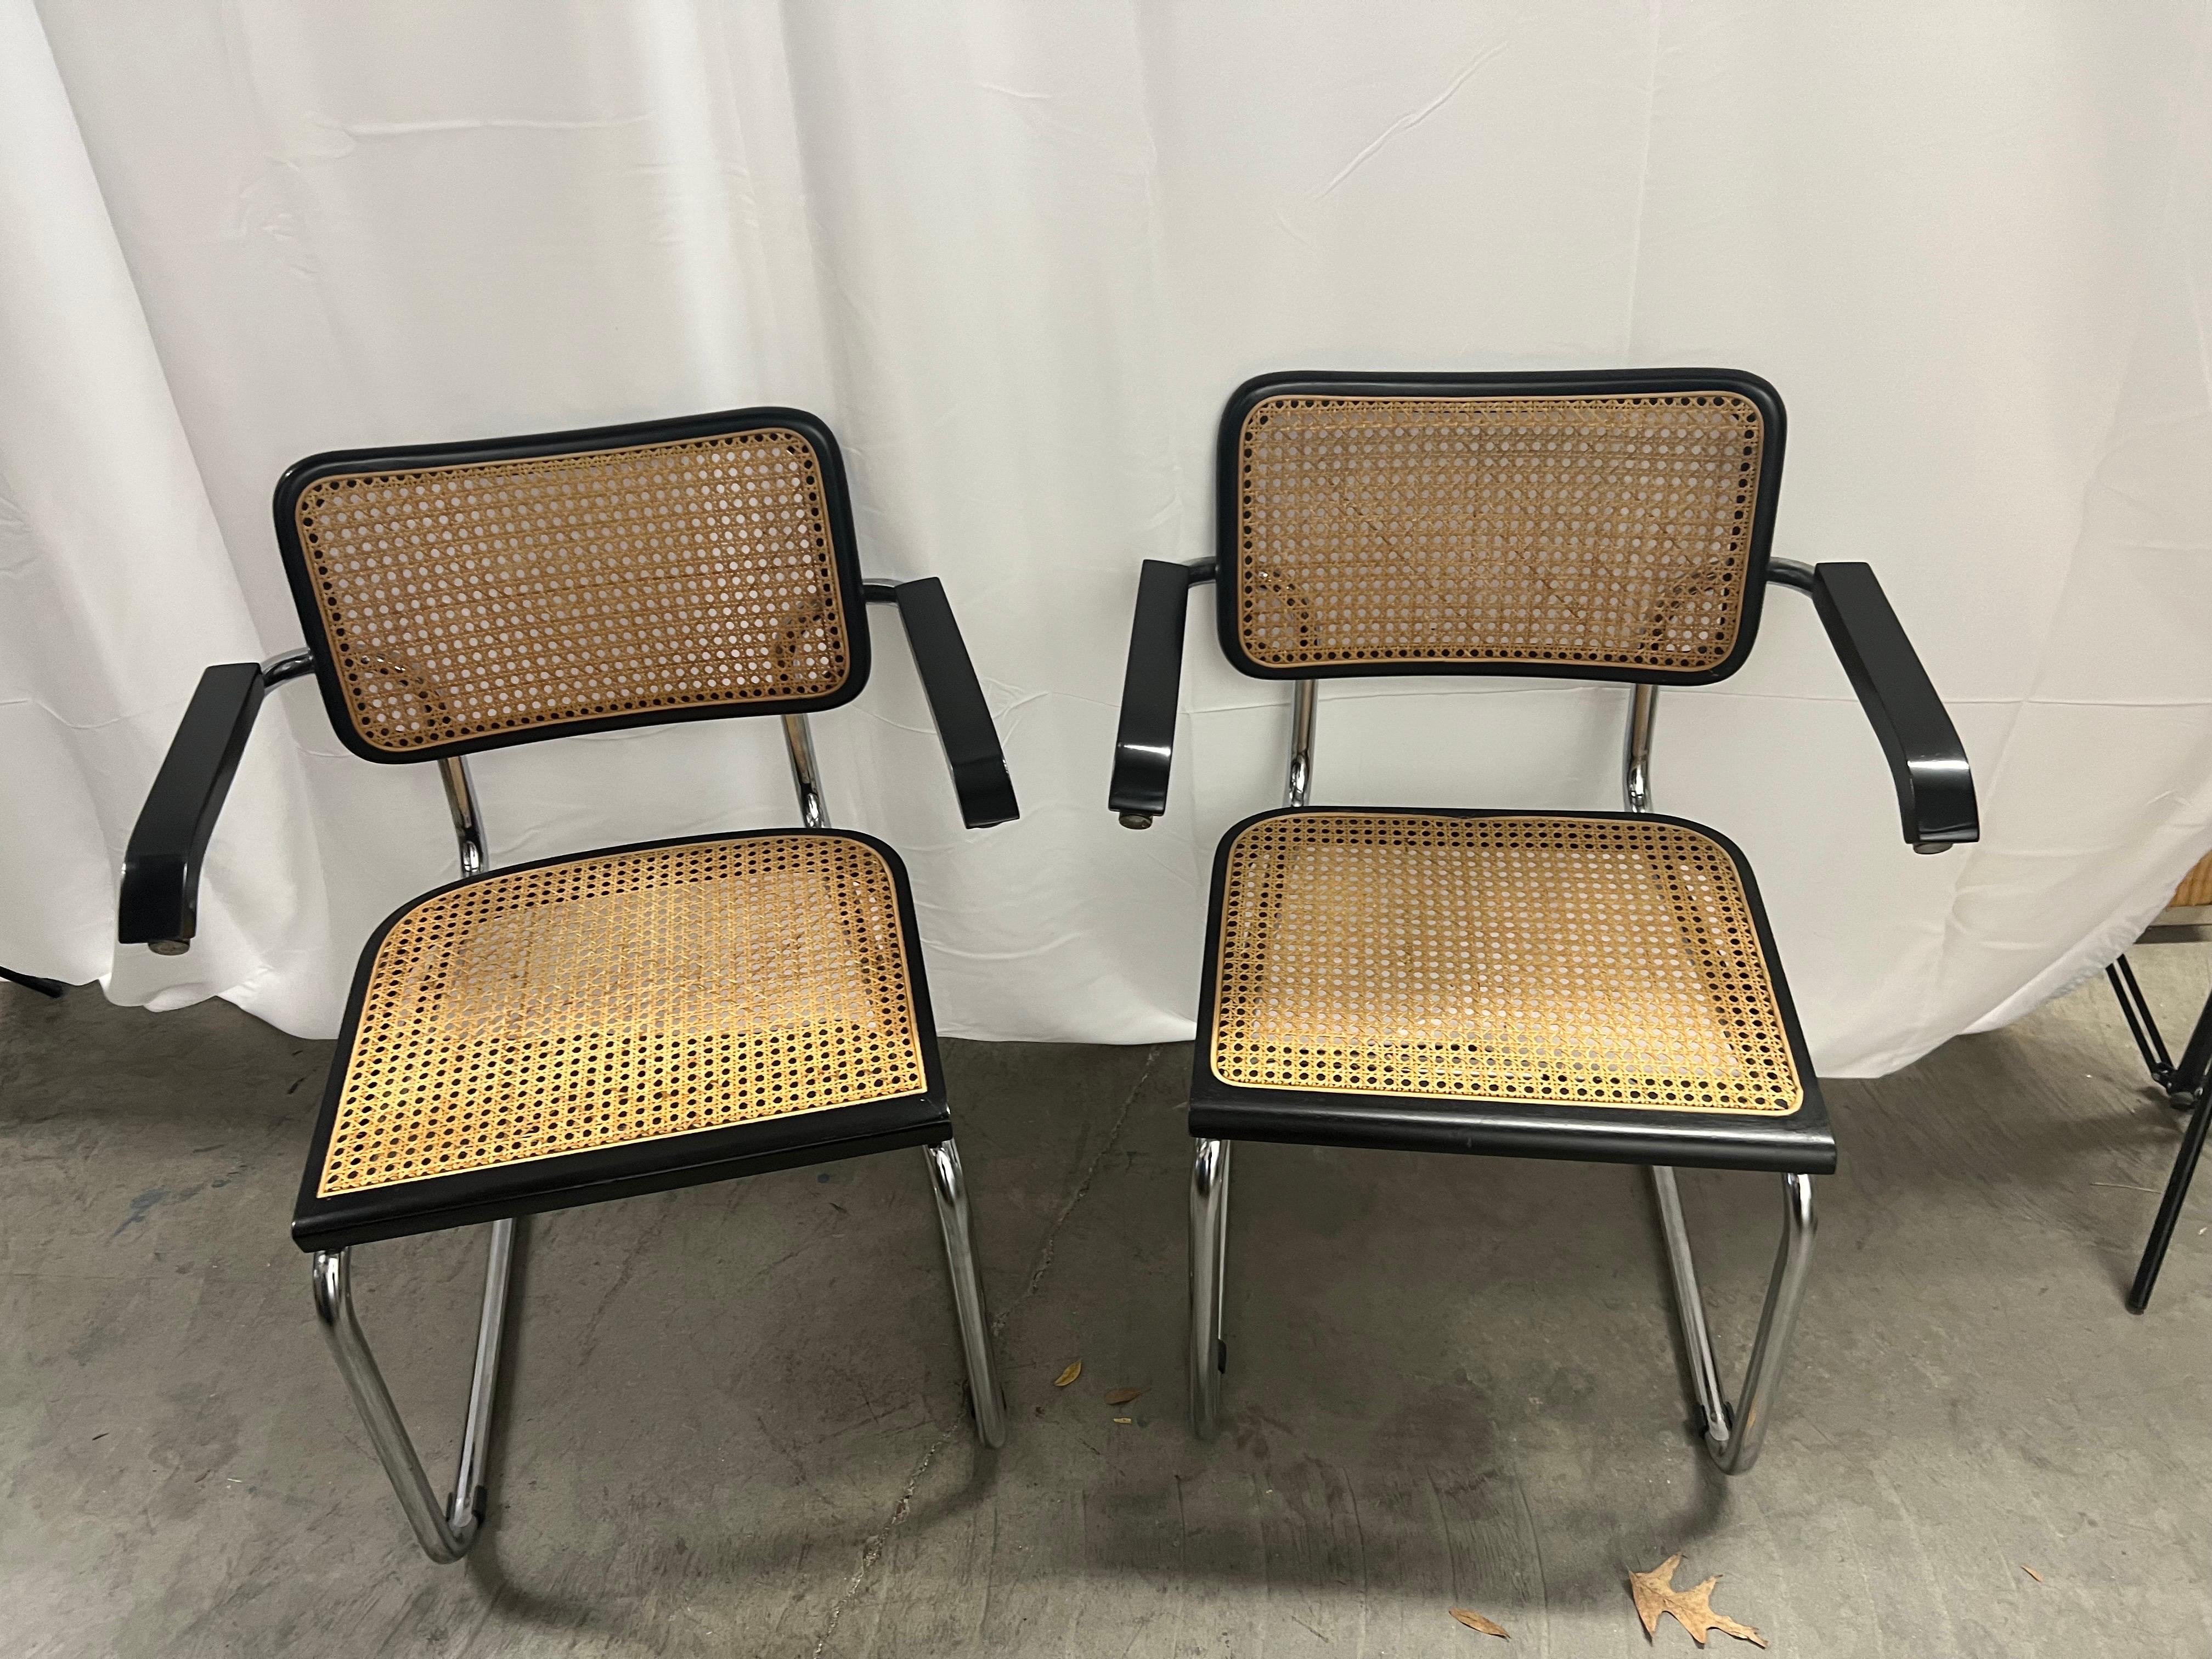 Vintage Cesca chair by Marcel Breuer Italy C. 1960
Vintage Cesca chair by Marcel Breuer. Made by Gavina, Italy, 1962. Version with arms. Very good vintage condition. Polished and refinished. Seller guarantees the authenticity of the item.  One of